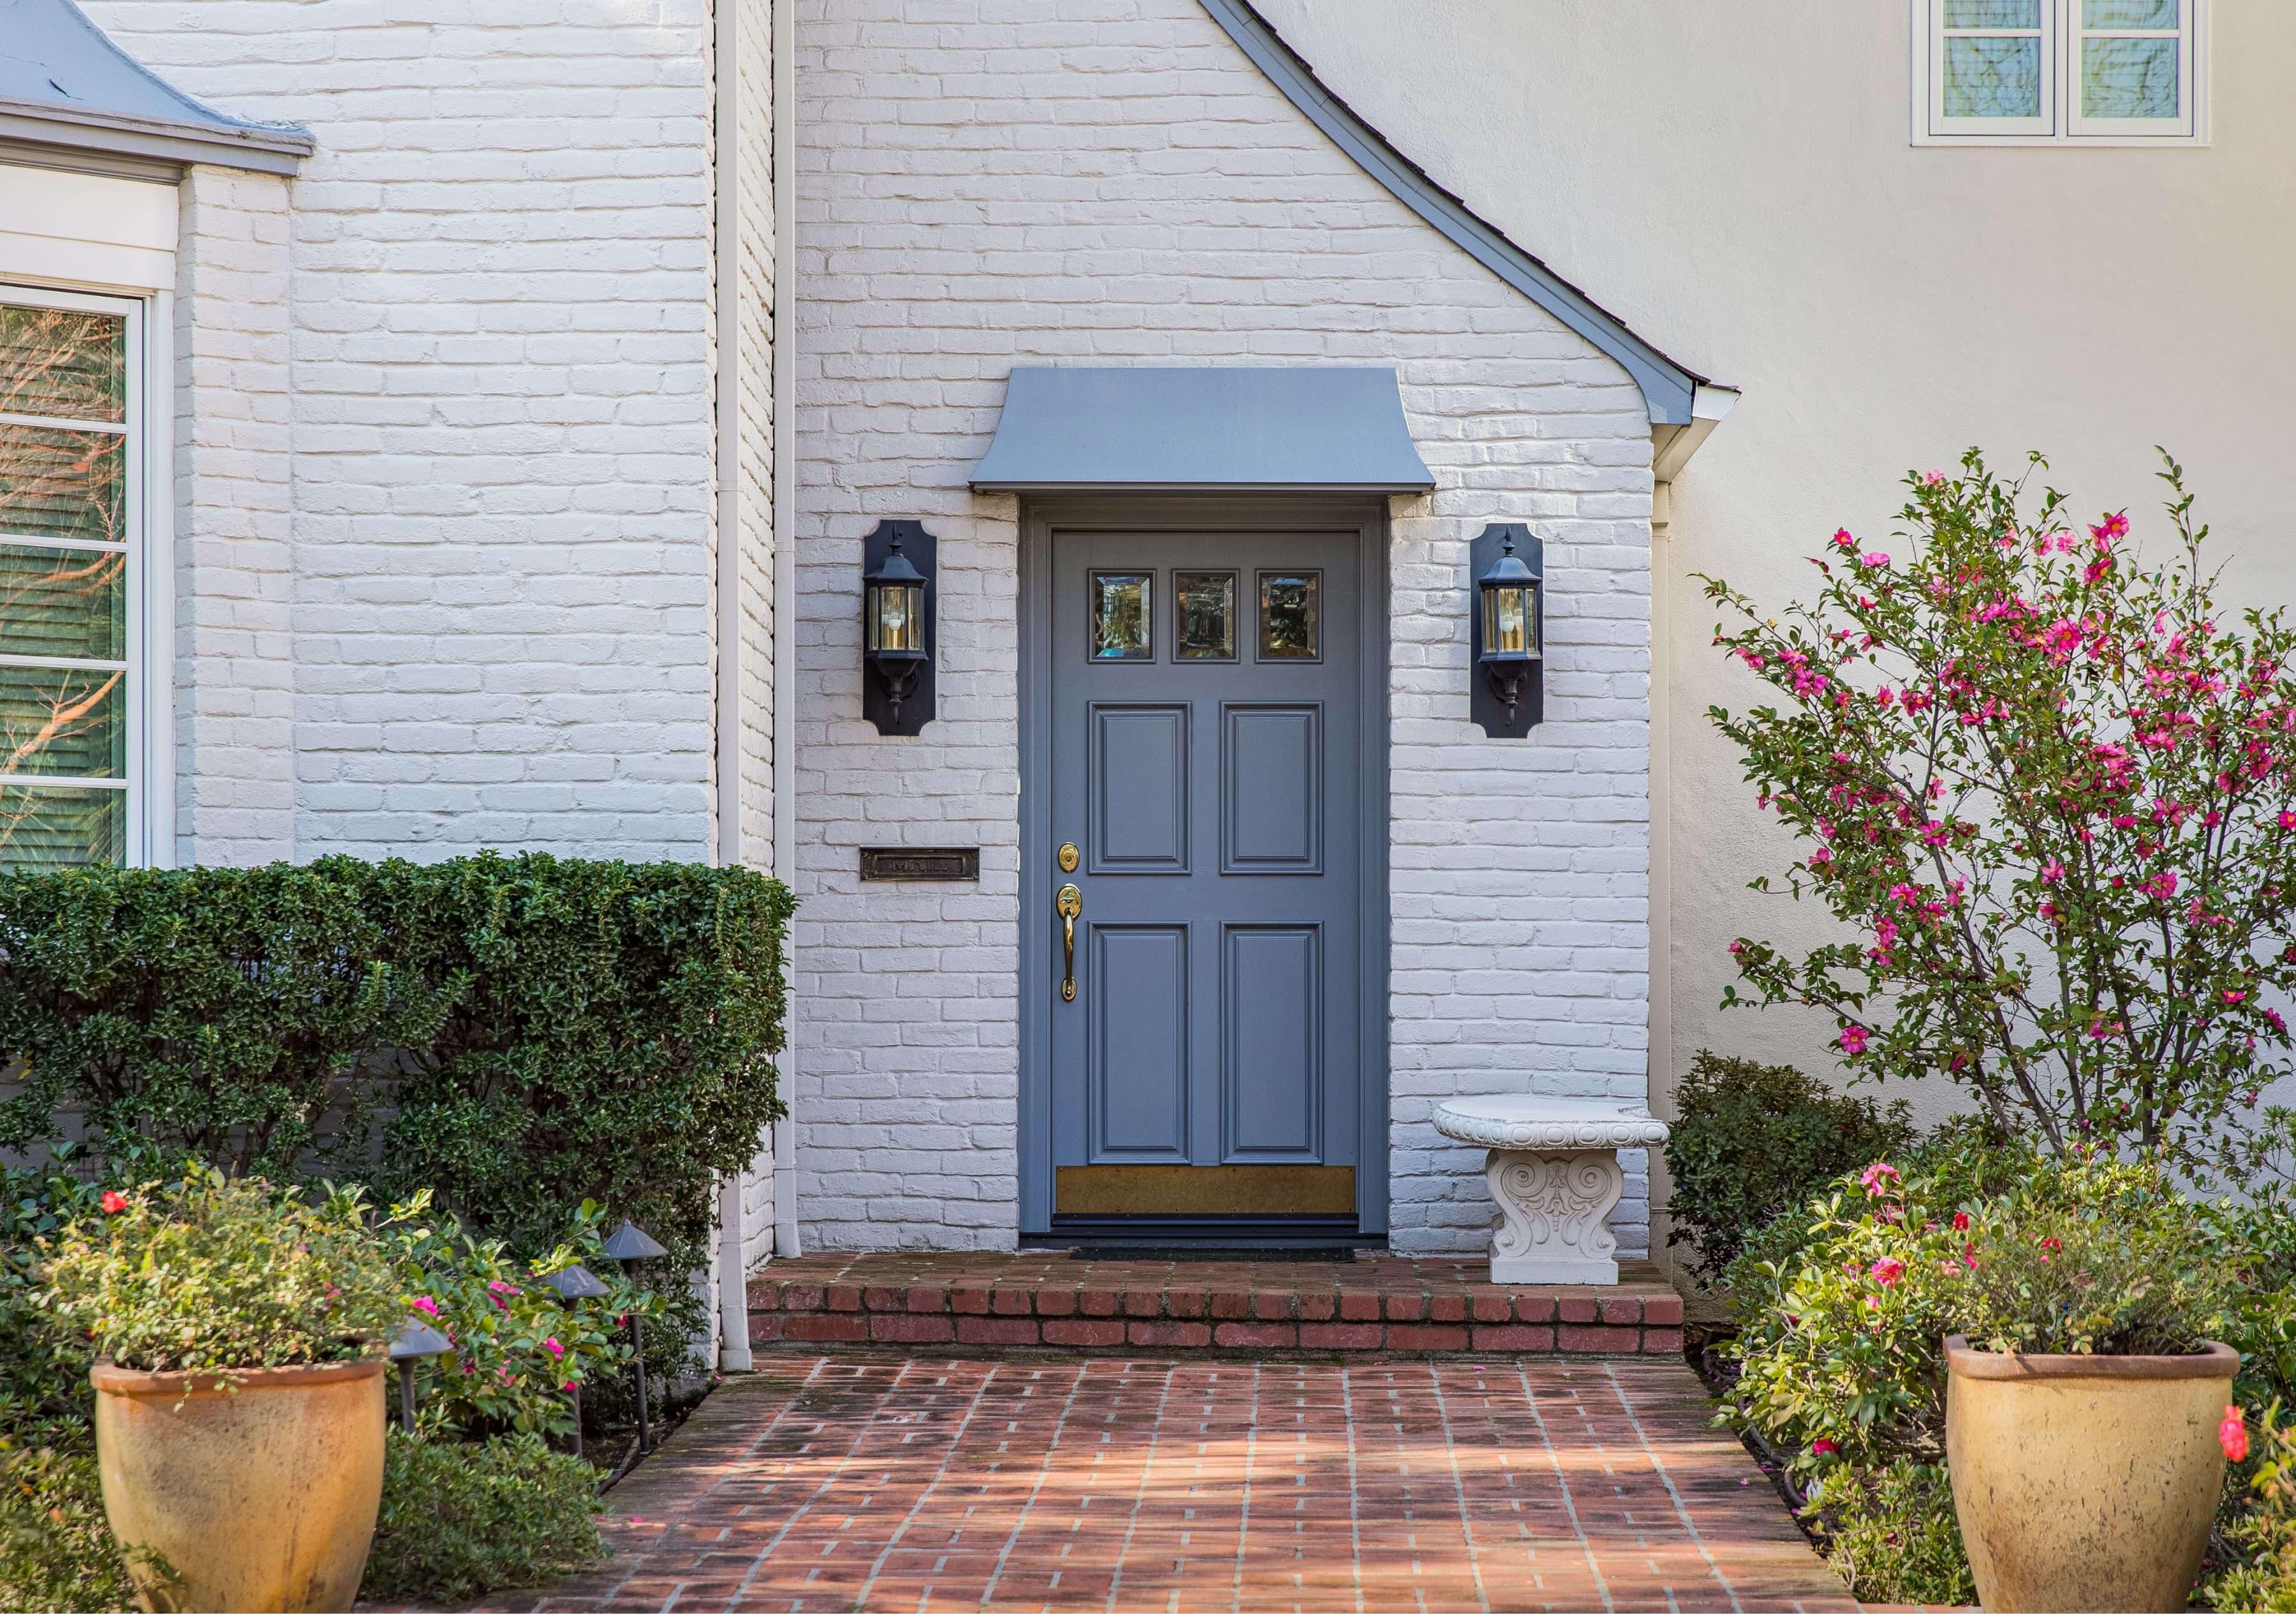 A brick walkway leading to a white brick home with a grey front door and plants